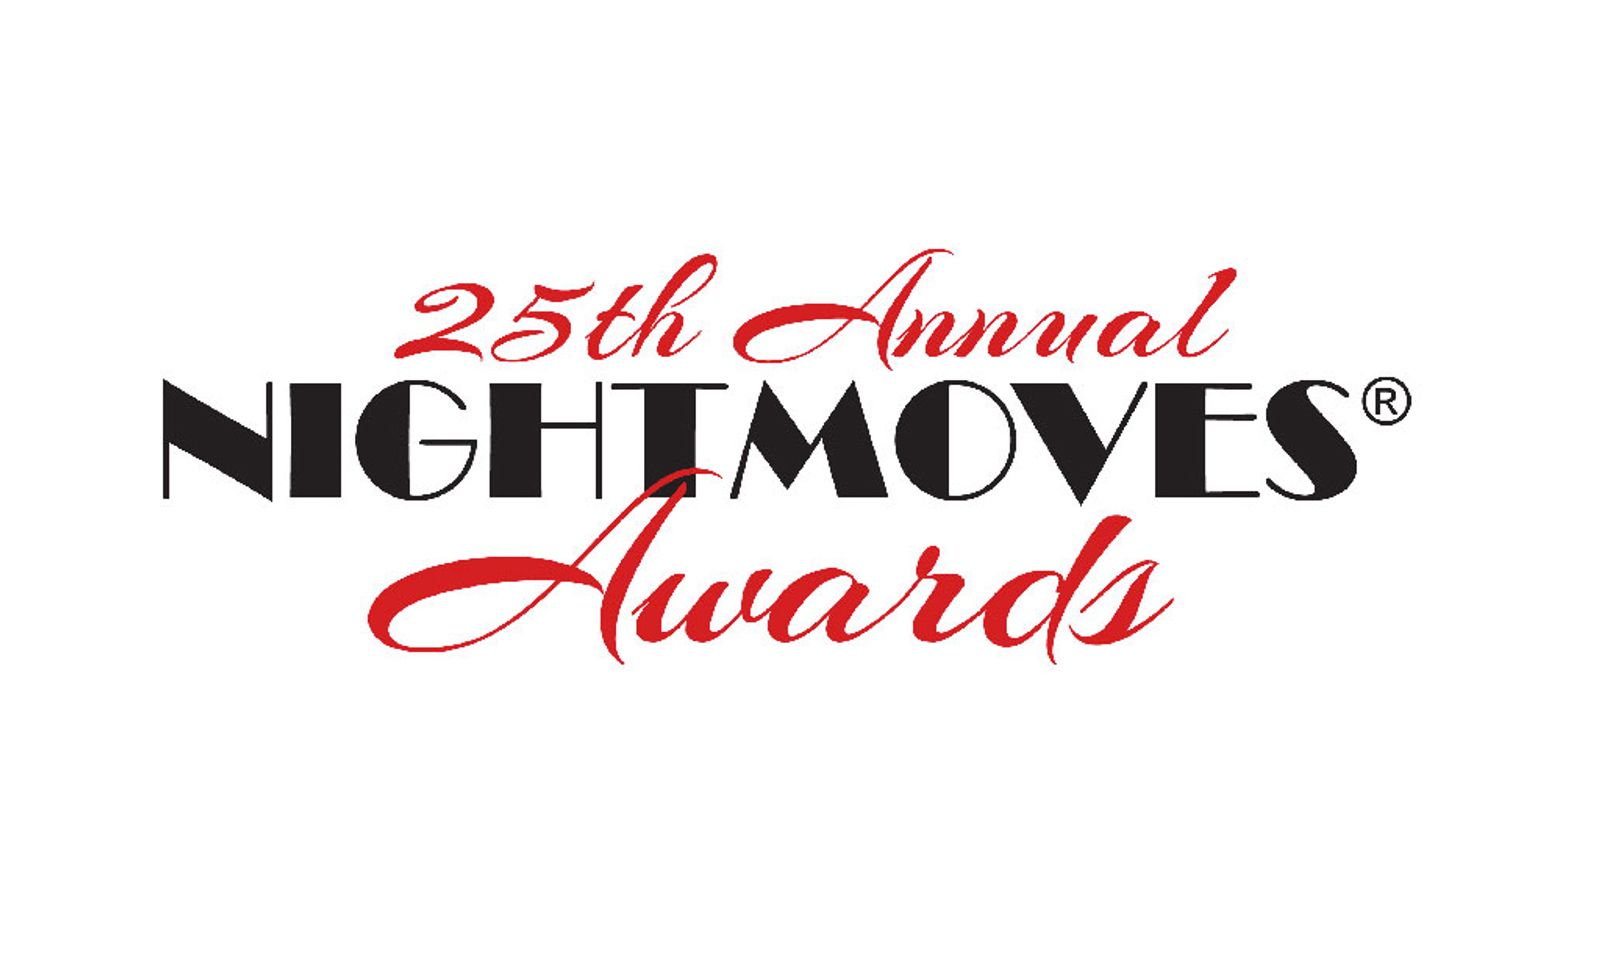 NightMoves Awards Moves to Tampa Gold Club